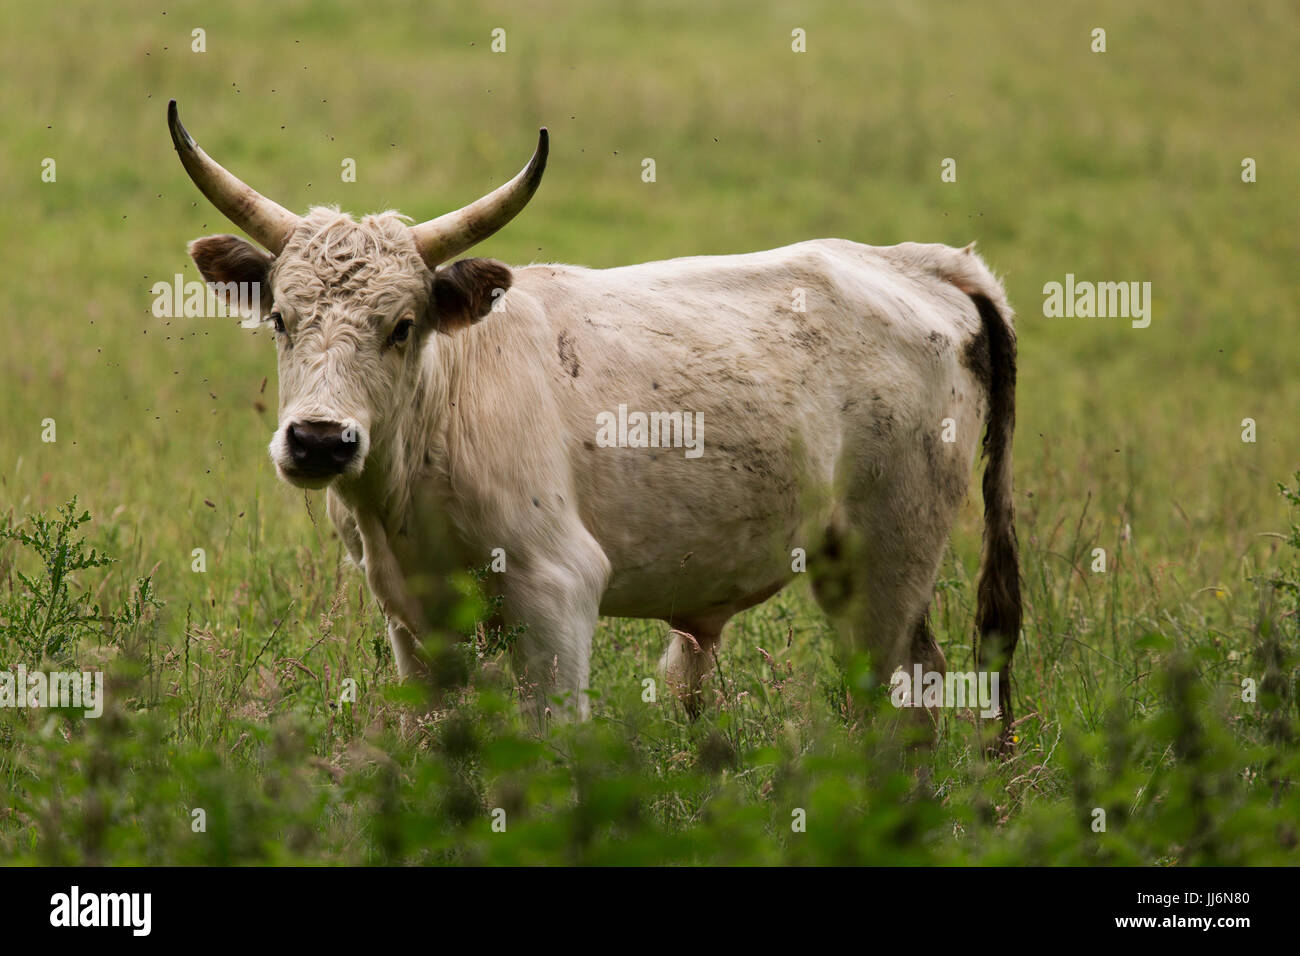 One of the wild cattle at Chillingham, surrounded by flies, in Northumberland, England. Stock Photo